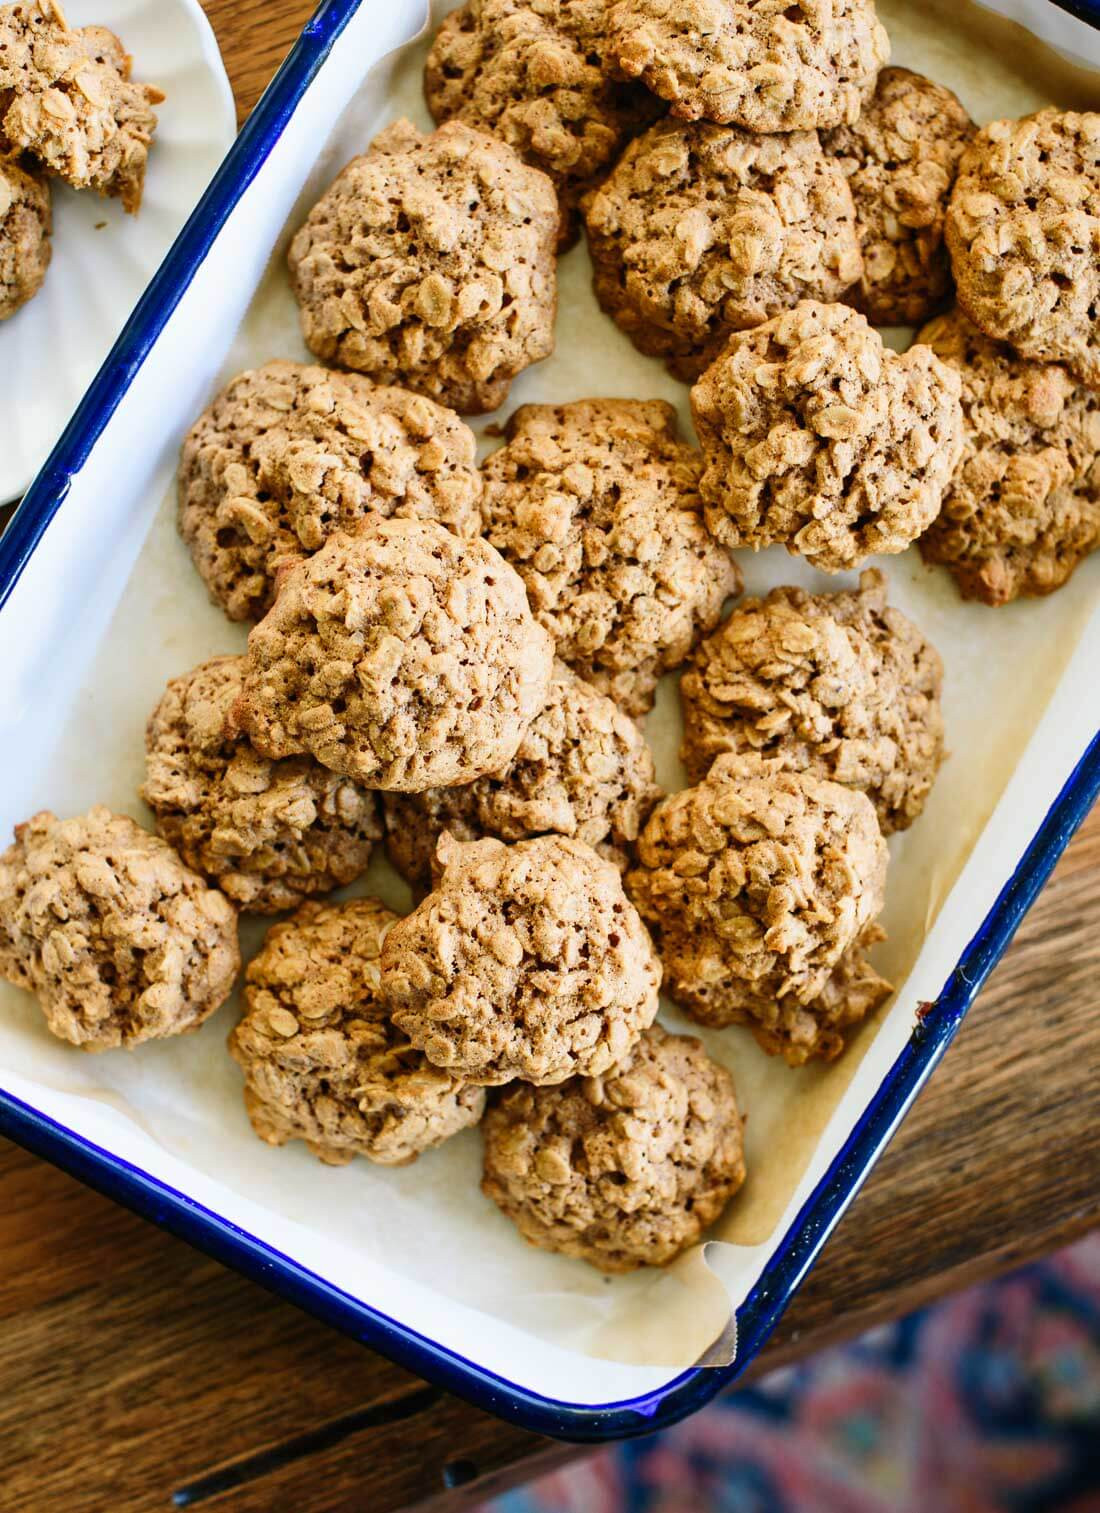 Recipes For Oatmeal Cookies
 Spiced Oatmeal Cookies Cookie and Kate